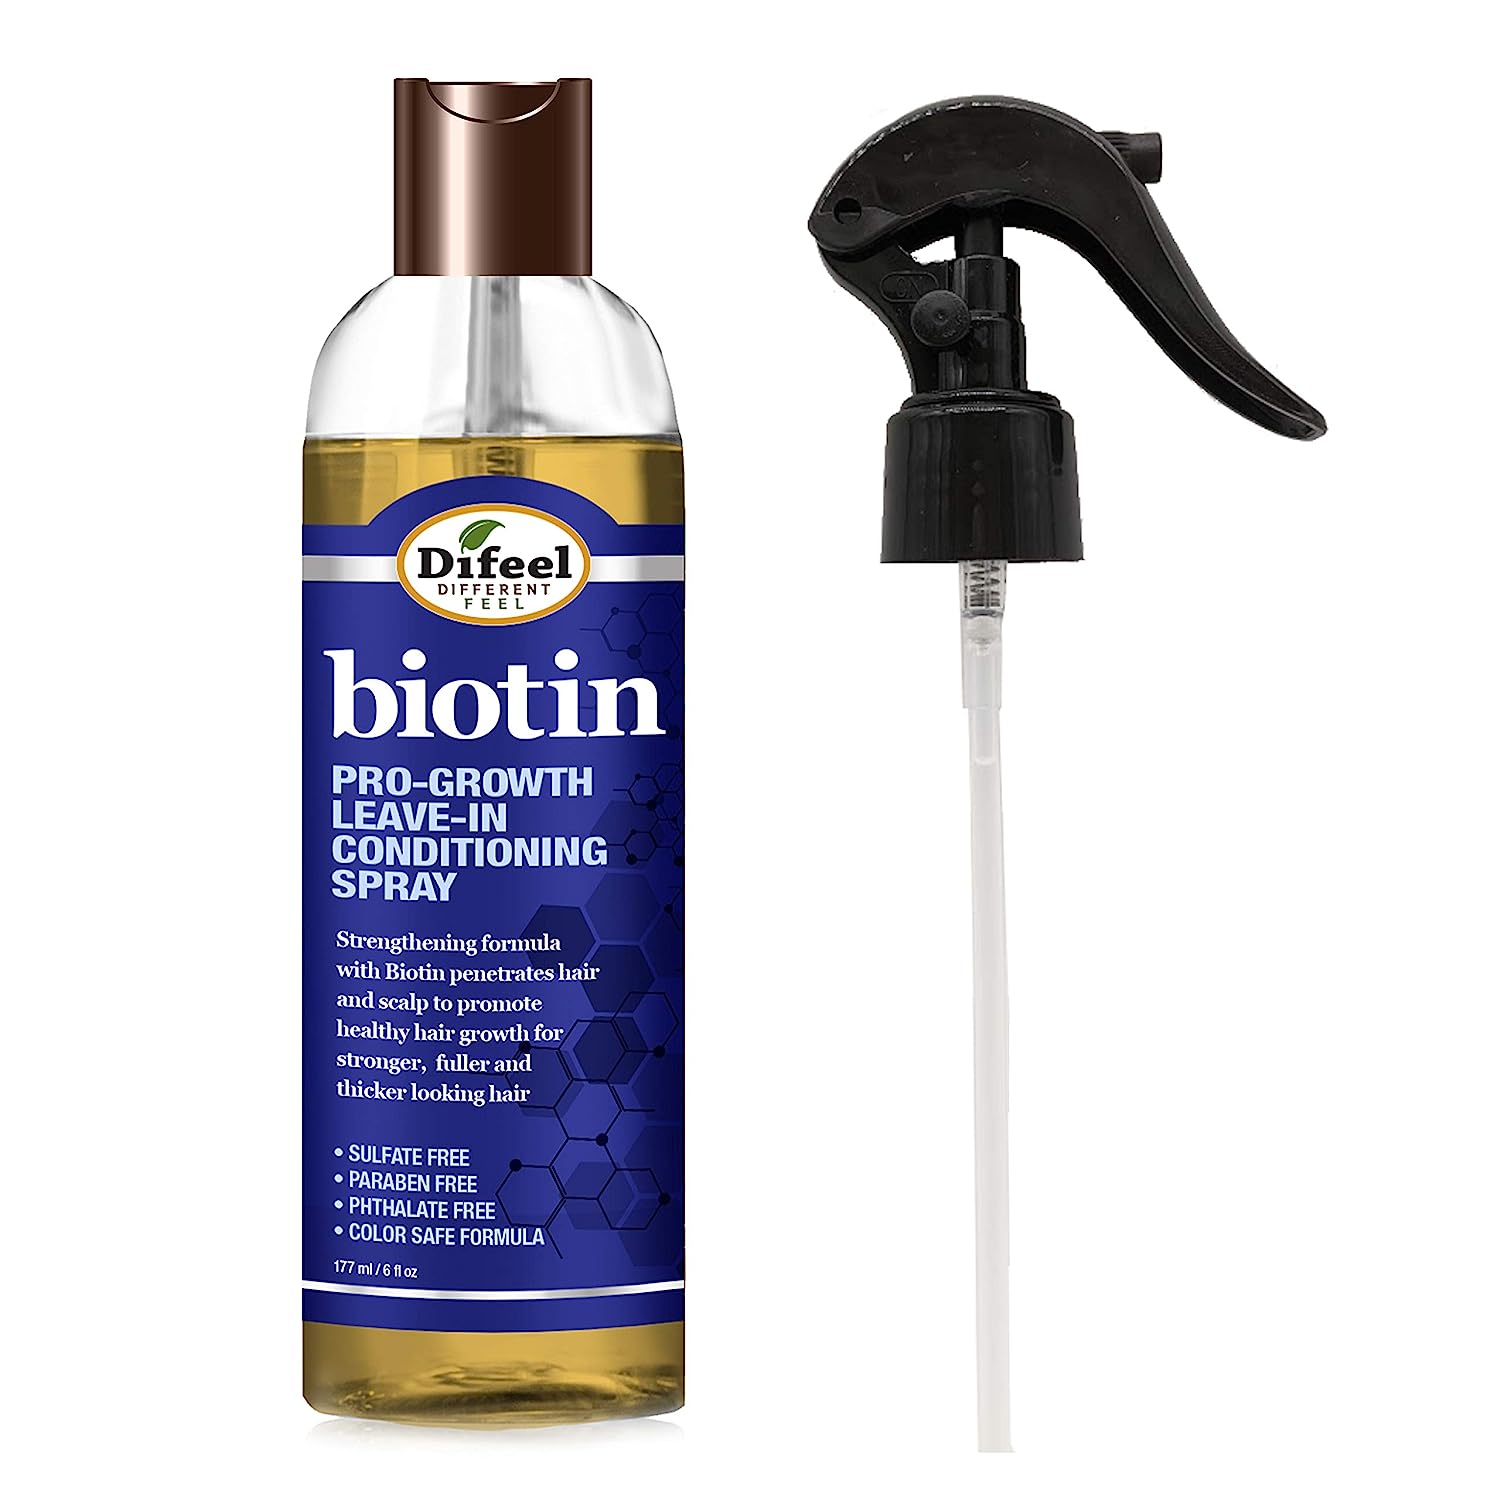 Difeel Pro-Growth Biotin Leave in Conditioning [...]